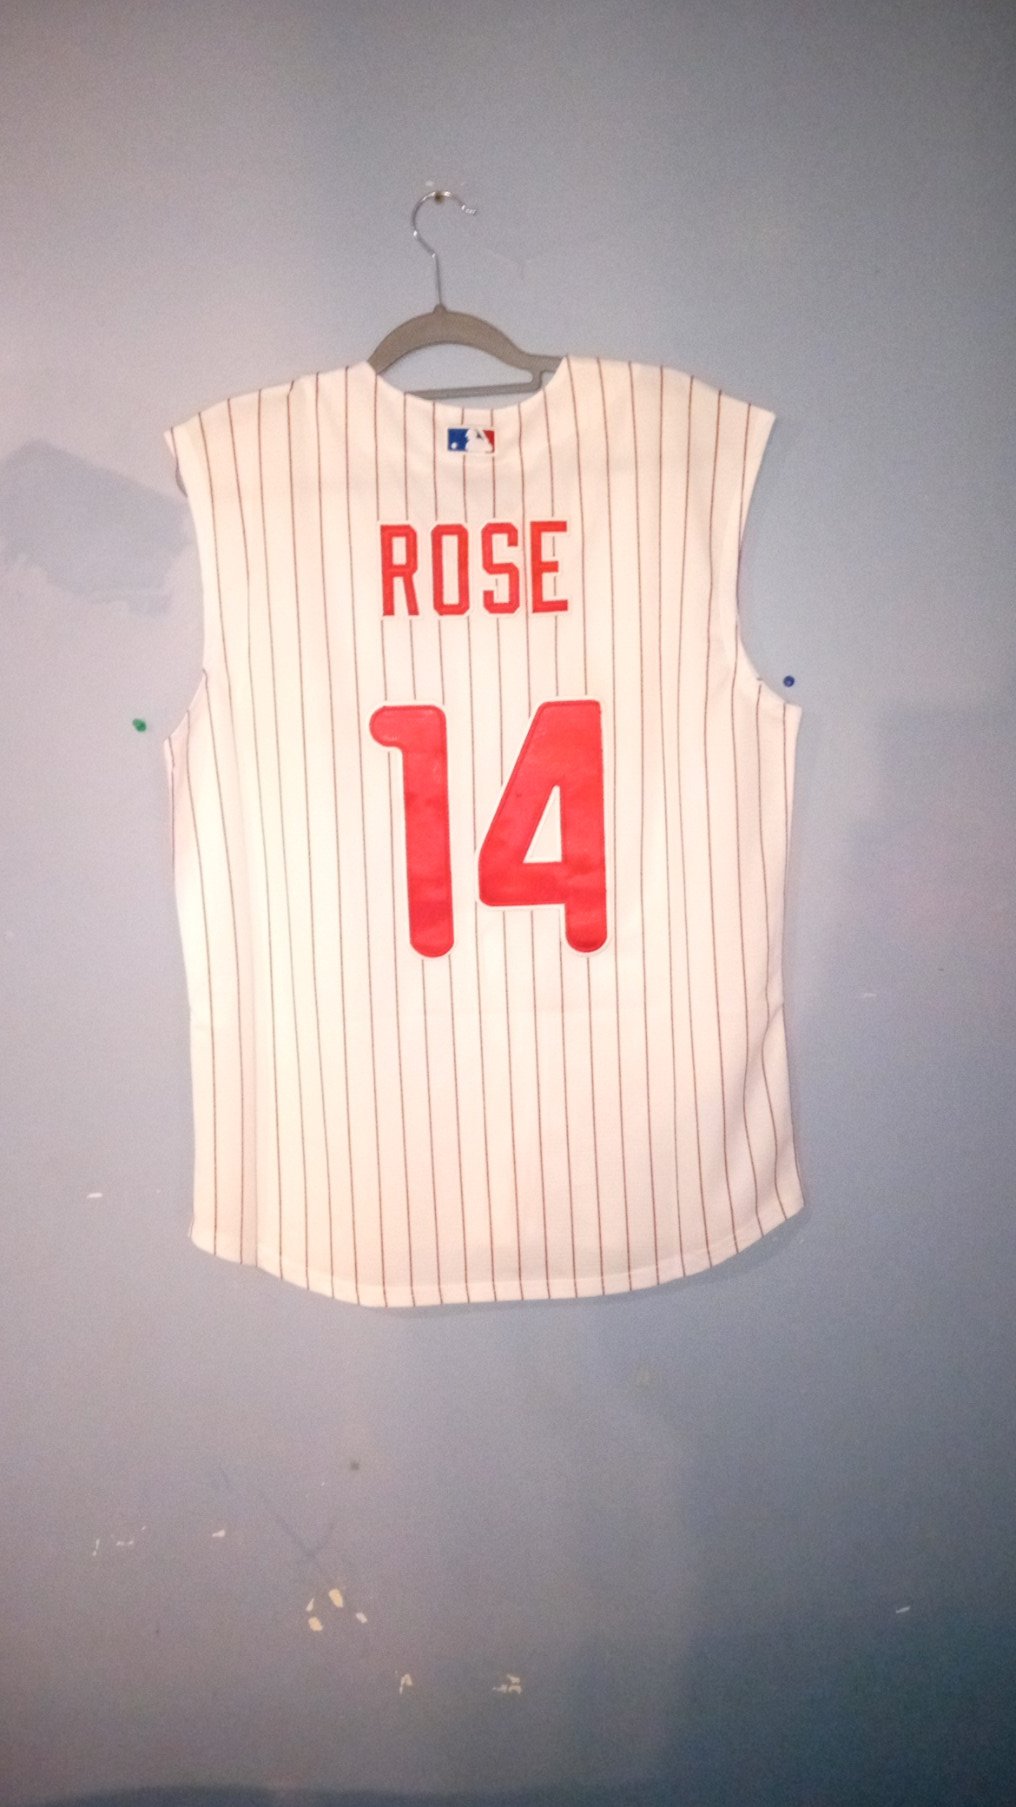 Majestic 1969 Cooperstown Collection Pete Rose Sleeveless Jersey. -  JerseyAve - Marketplace